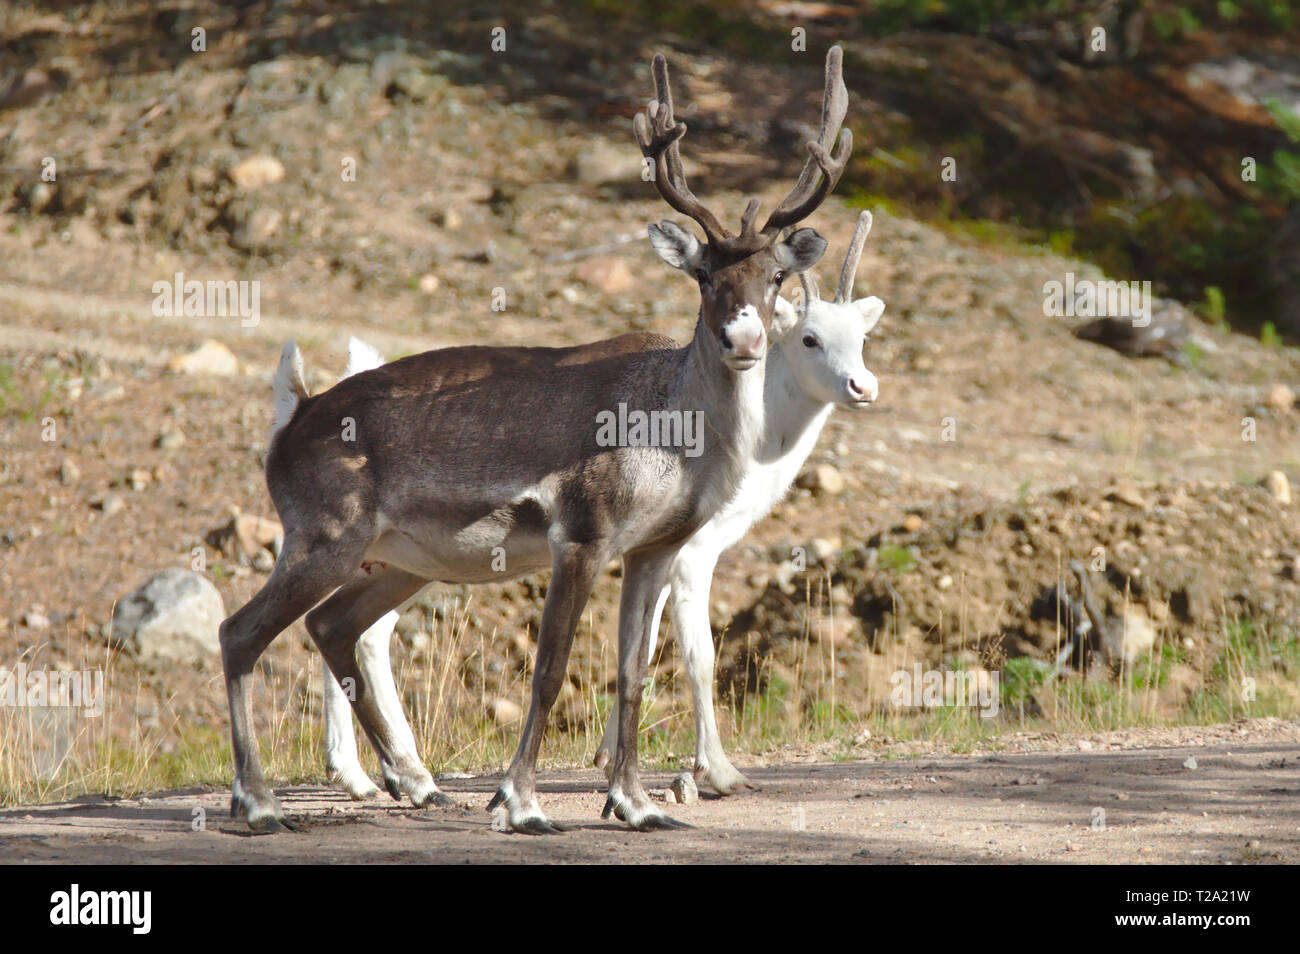 Brown and white reindeer standing together in the sun Stock Photo